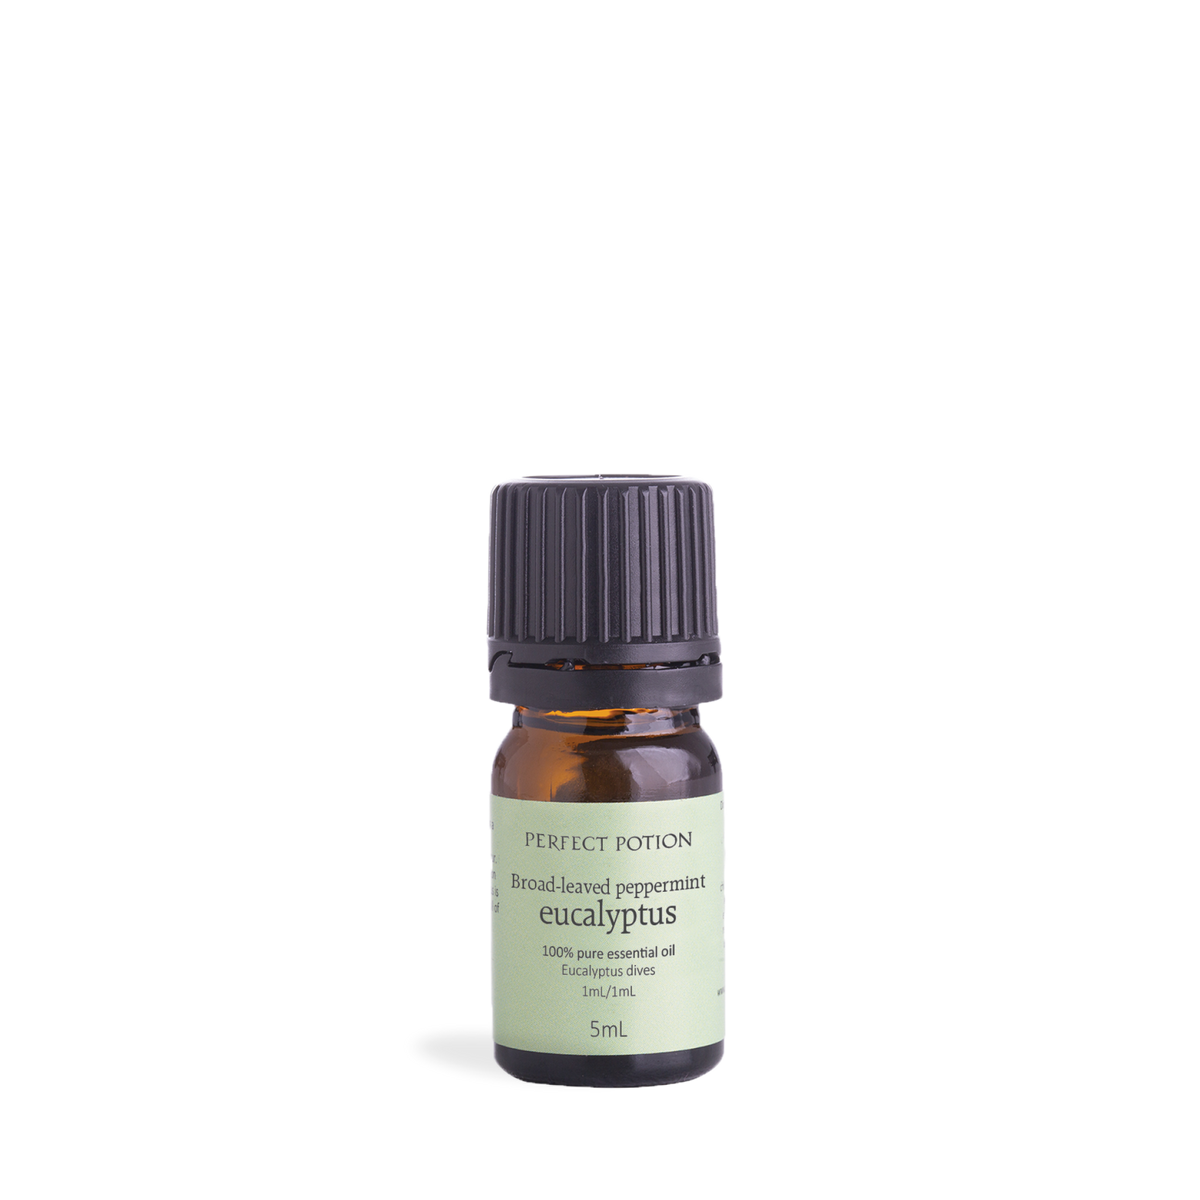 Eucalyptus Broad-Leaved Peppermint Pure Essential Oil